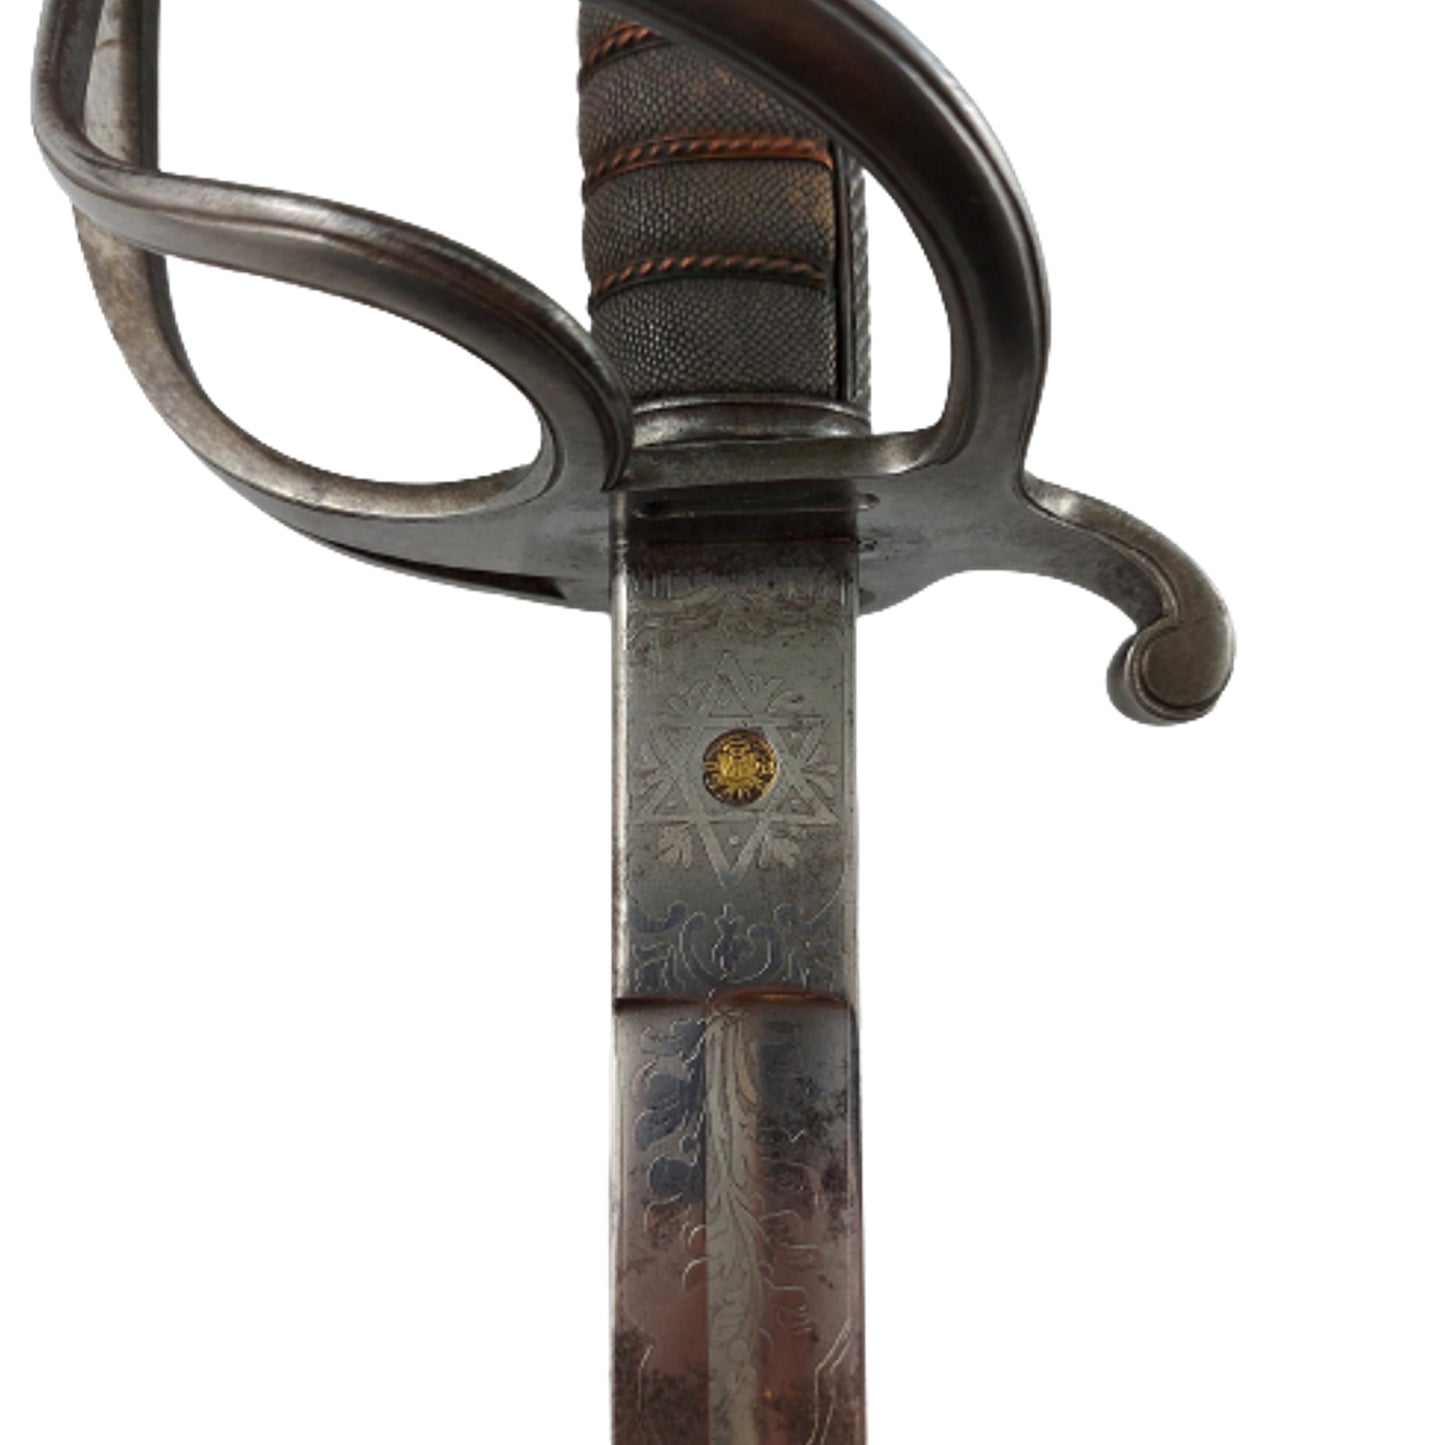 Canadian Issue British Pattern 1850 Officer's Sword In Scabbard - C.M.S.C.